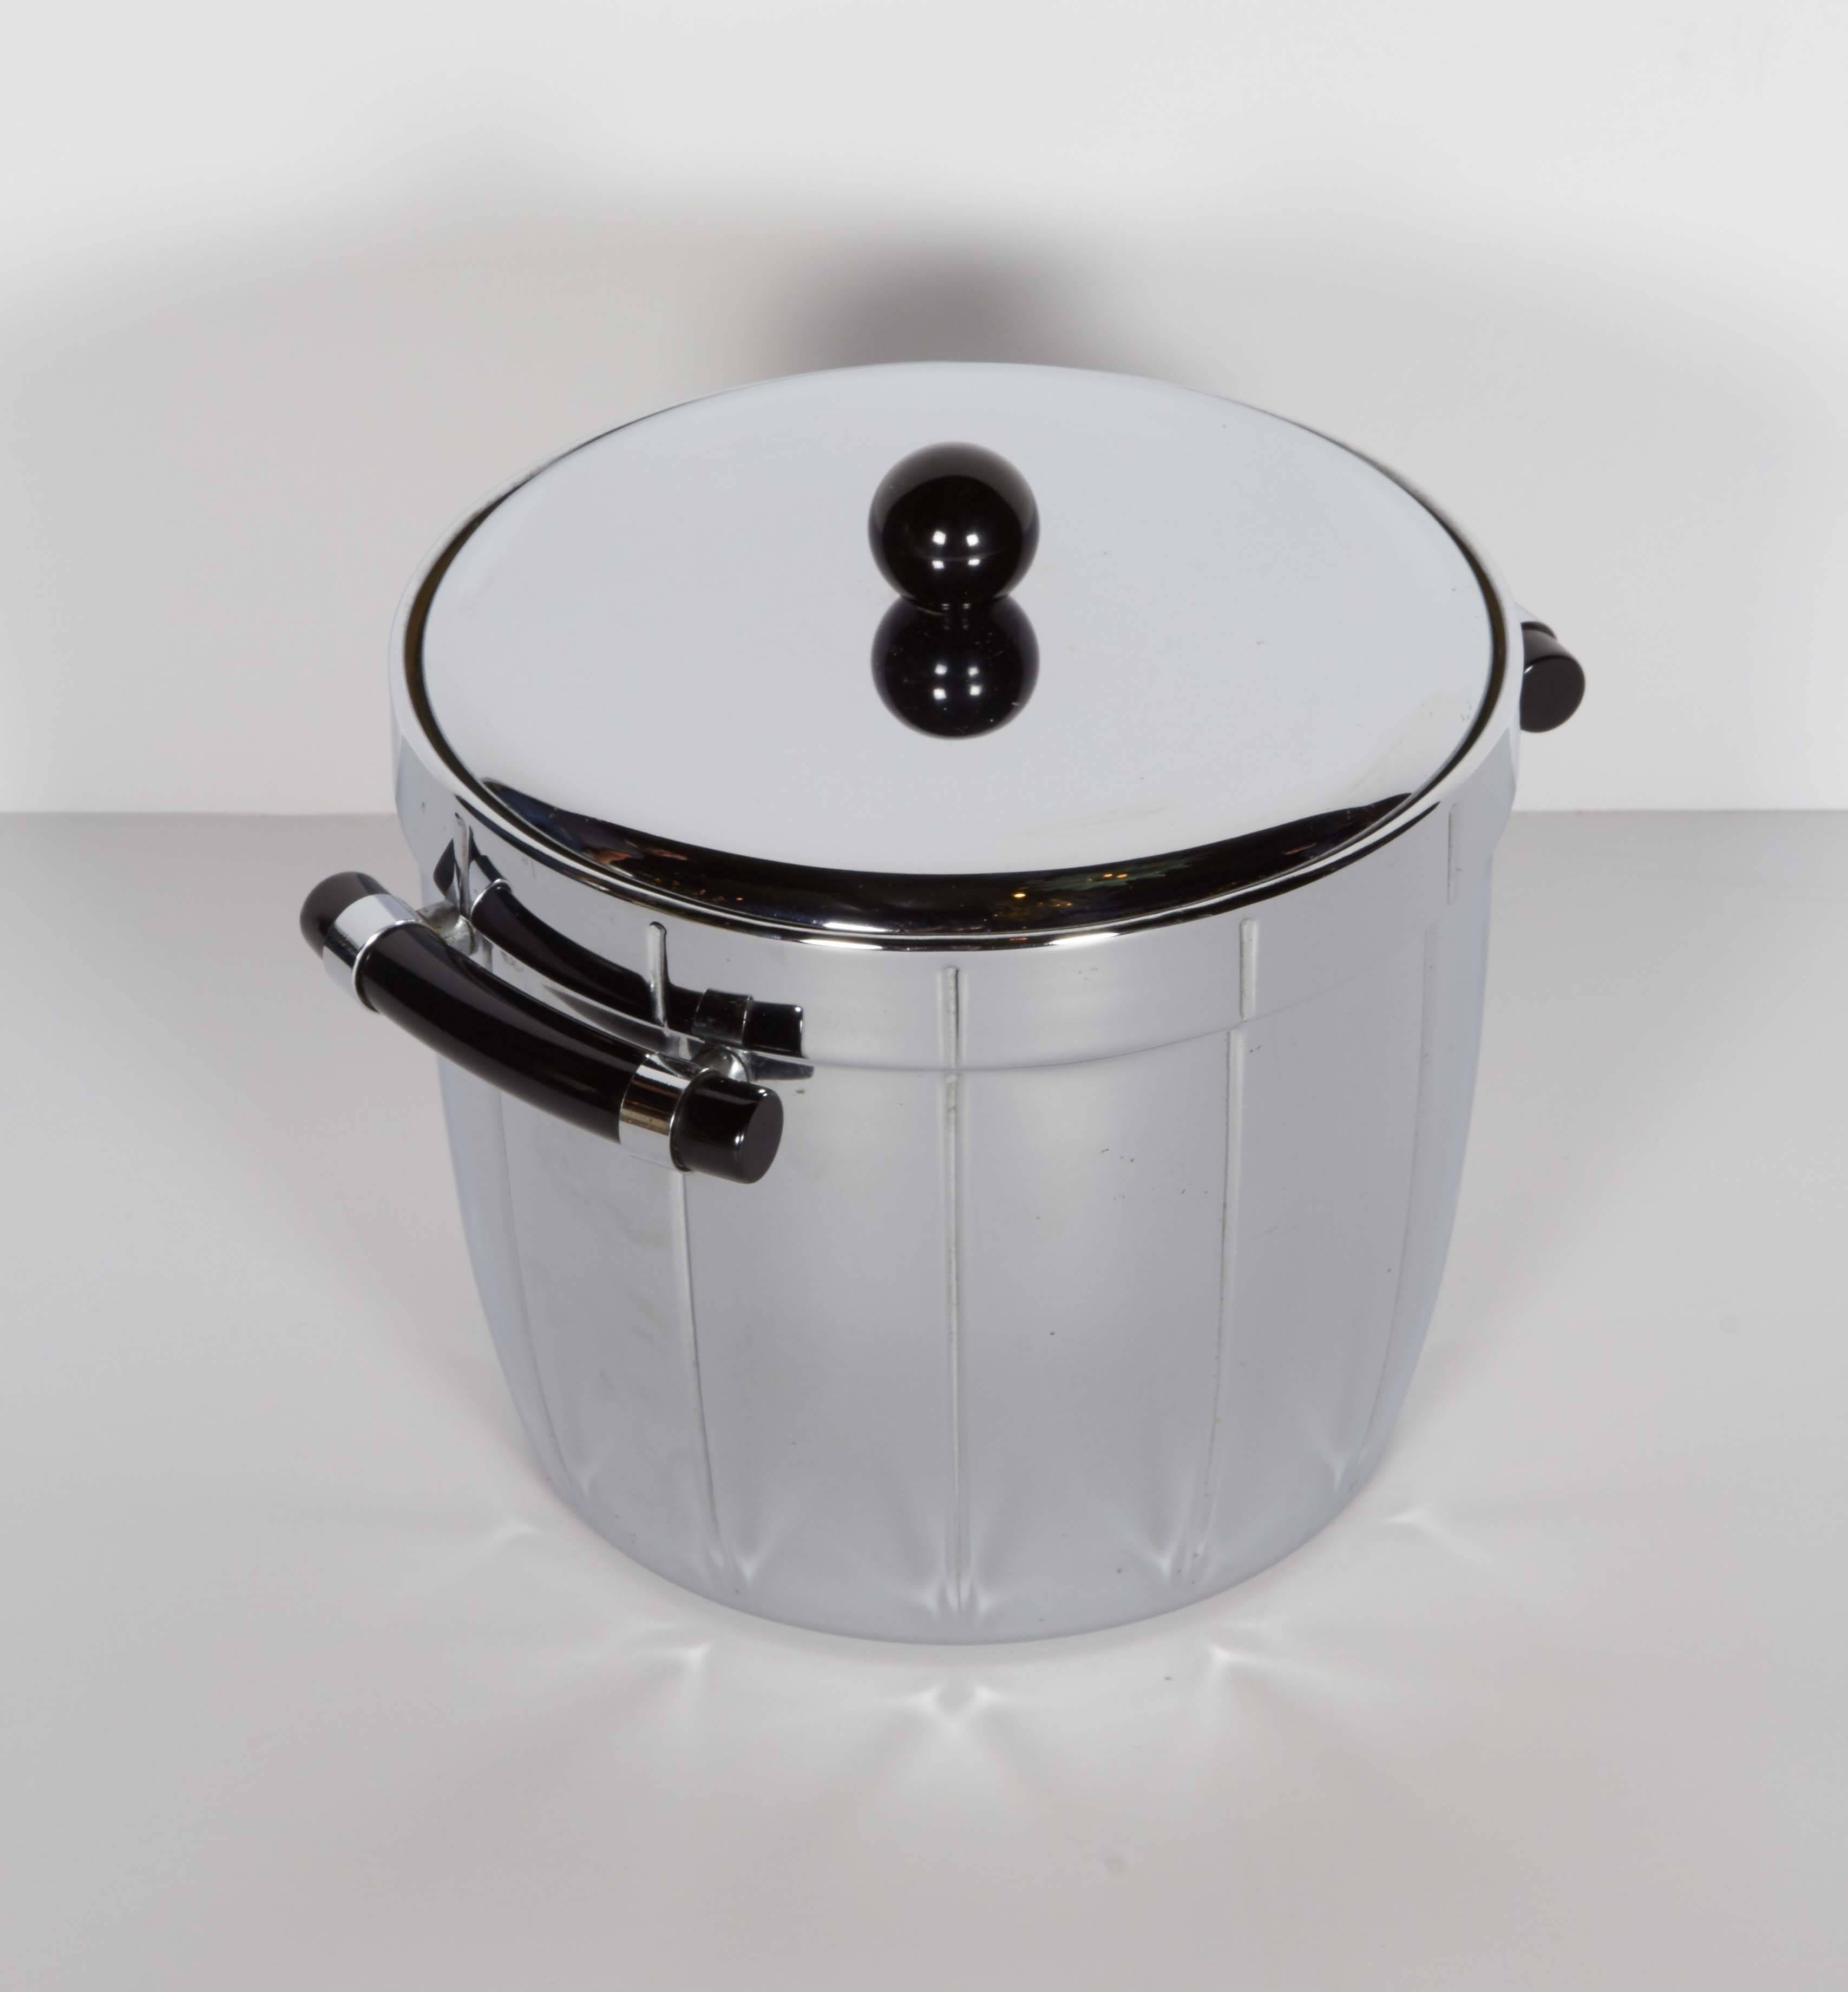 Art Deco ice bucket with handsome Machine Age design. The ice bucket is made of highly polished chrome and features exquisite black bakelite handles and top finial detail. The ice bucket has a mercury glass interior for easy cleaning and features